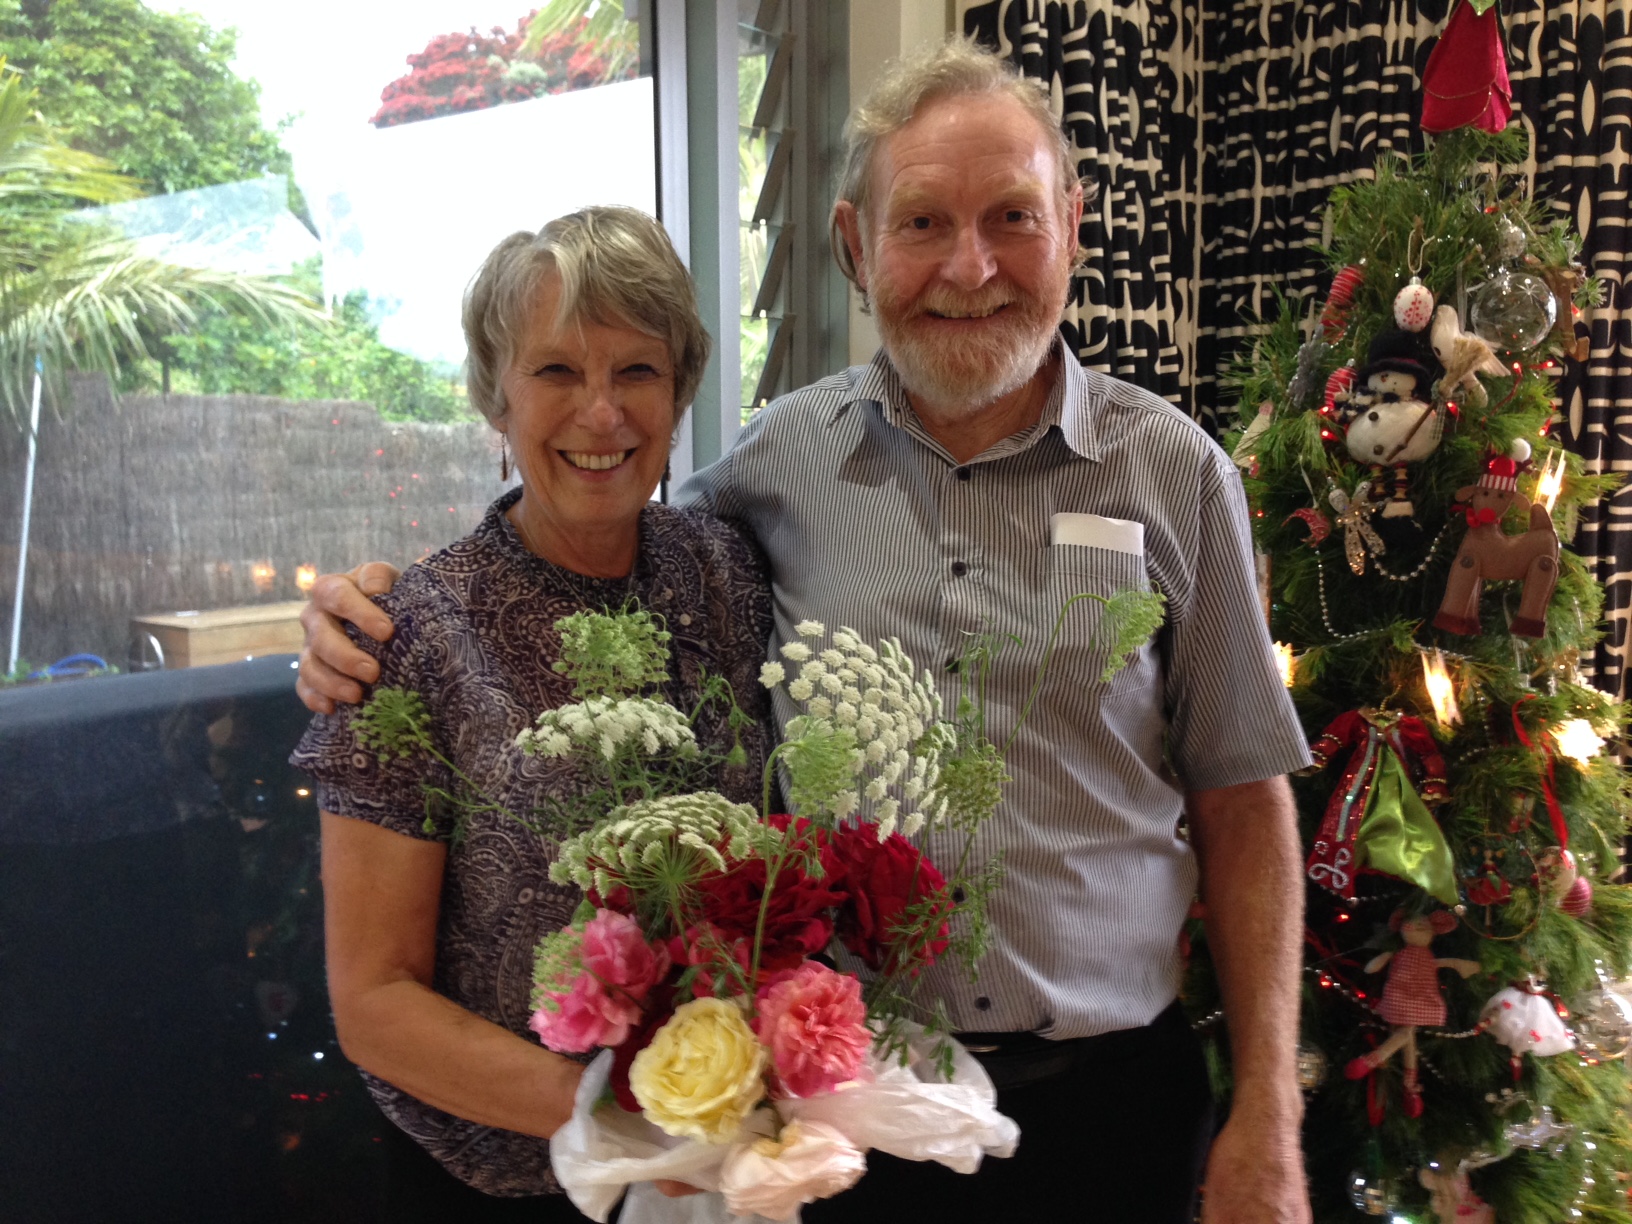 Evelyn receives beautiful home grown flowers from Trevor, who she has worked with for twelve years